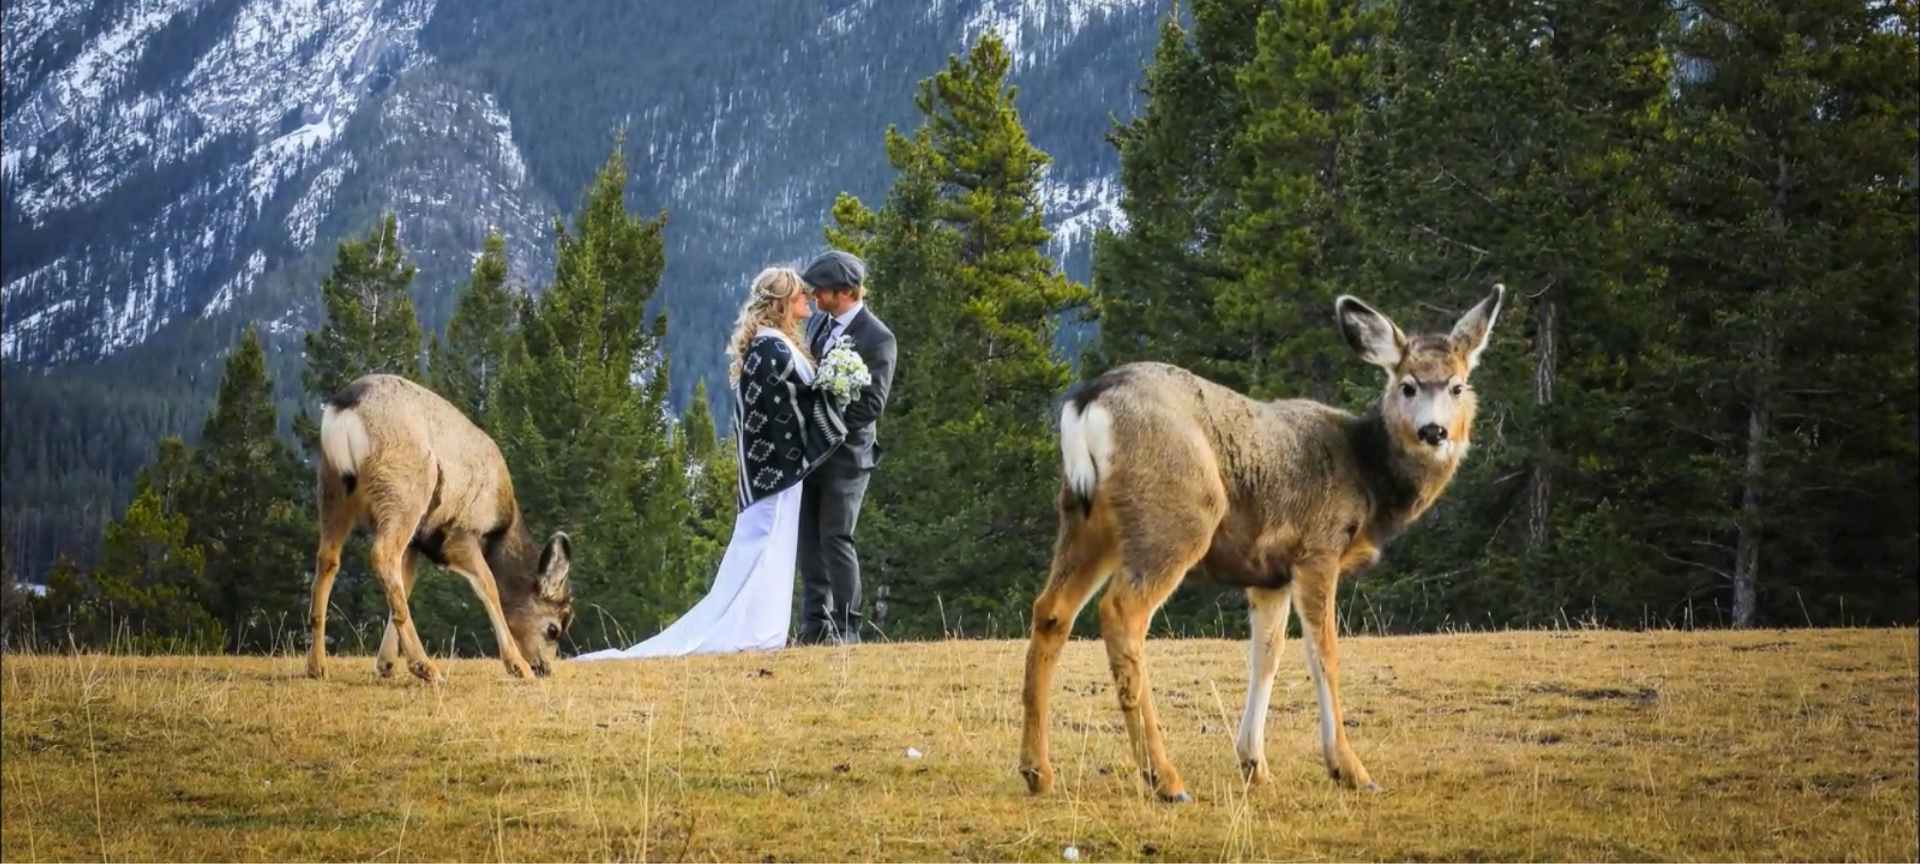 banff elopement package - rocky mountains wedding in canada